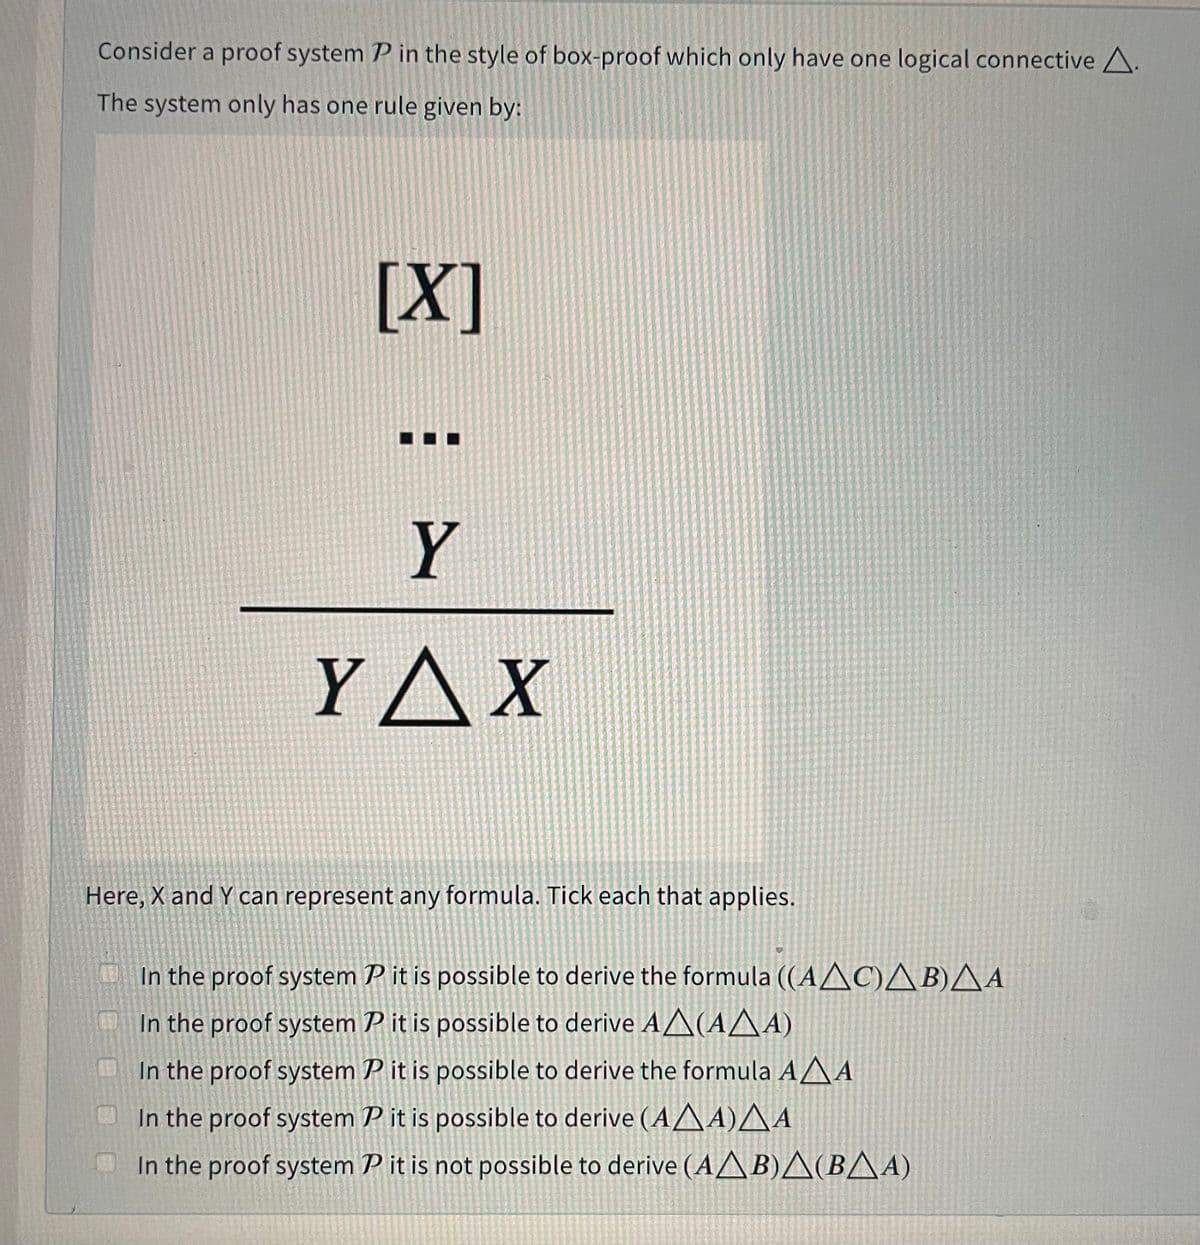 Consider a proof system P in the style of box-proof which only have one logical connective A.
The system only has one rule given by:
[X]
Y
YAX
Here, X and Y can represent any formula. Tick each that applies.
In the proof system P it is possible to derive the formula ((AAC)AB)AA
In the proof system P it is possible to derive AA(AA A)
In the proof system P it is possible to derive the formula AAA
In the proof system P it is possible to derive (AAA)^ A
In the proof system P it is not possible to derive (AA B)A(BAA)
